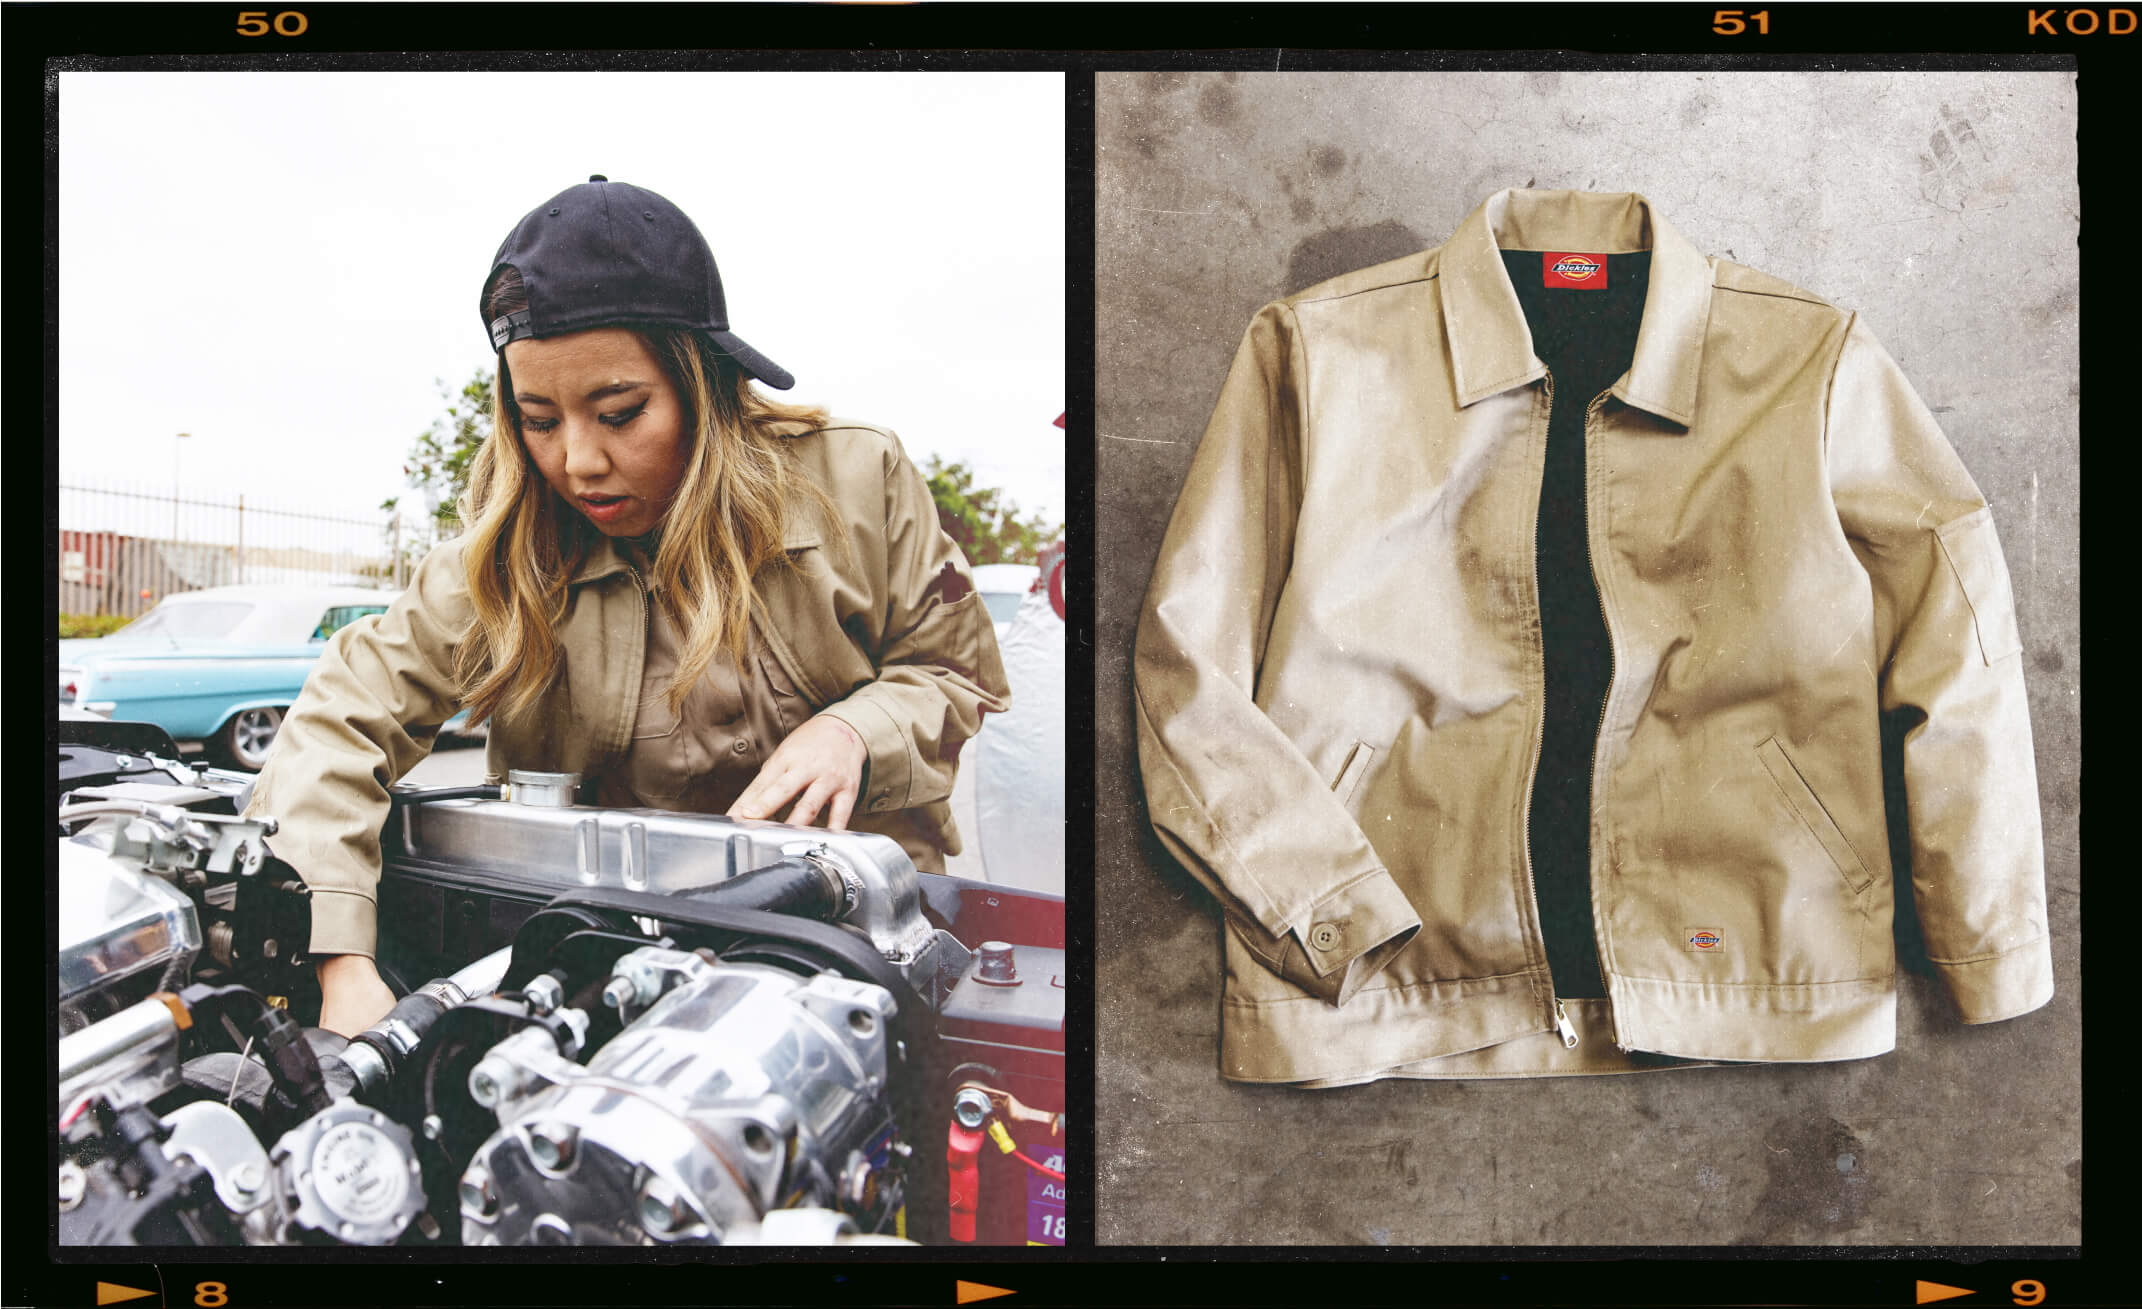 Two images vertically split in the middle, Kay working on a car engine on the left. On the right, a laydown view of an eisenhower jacket.